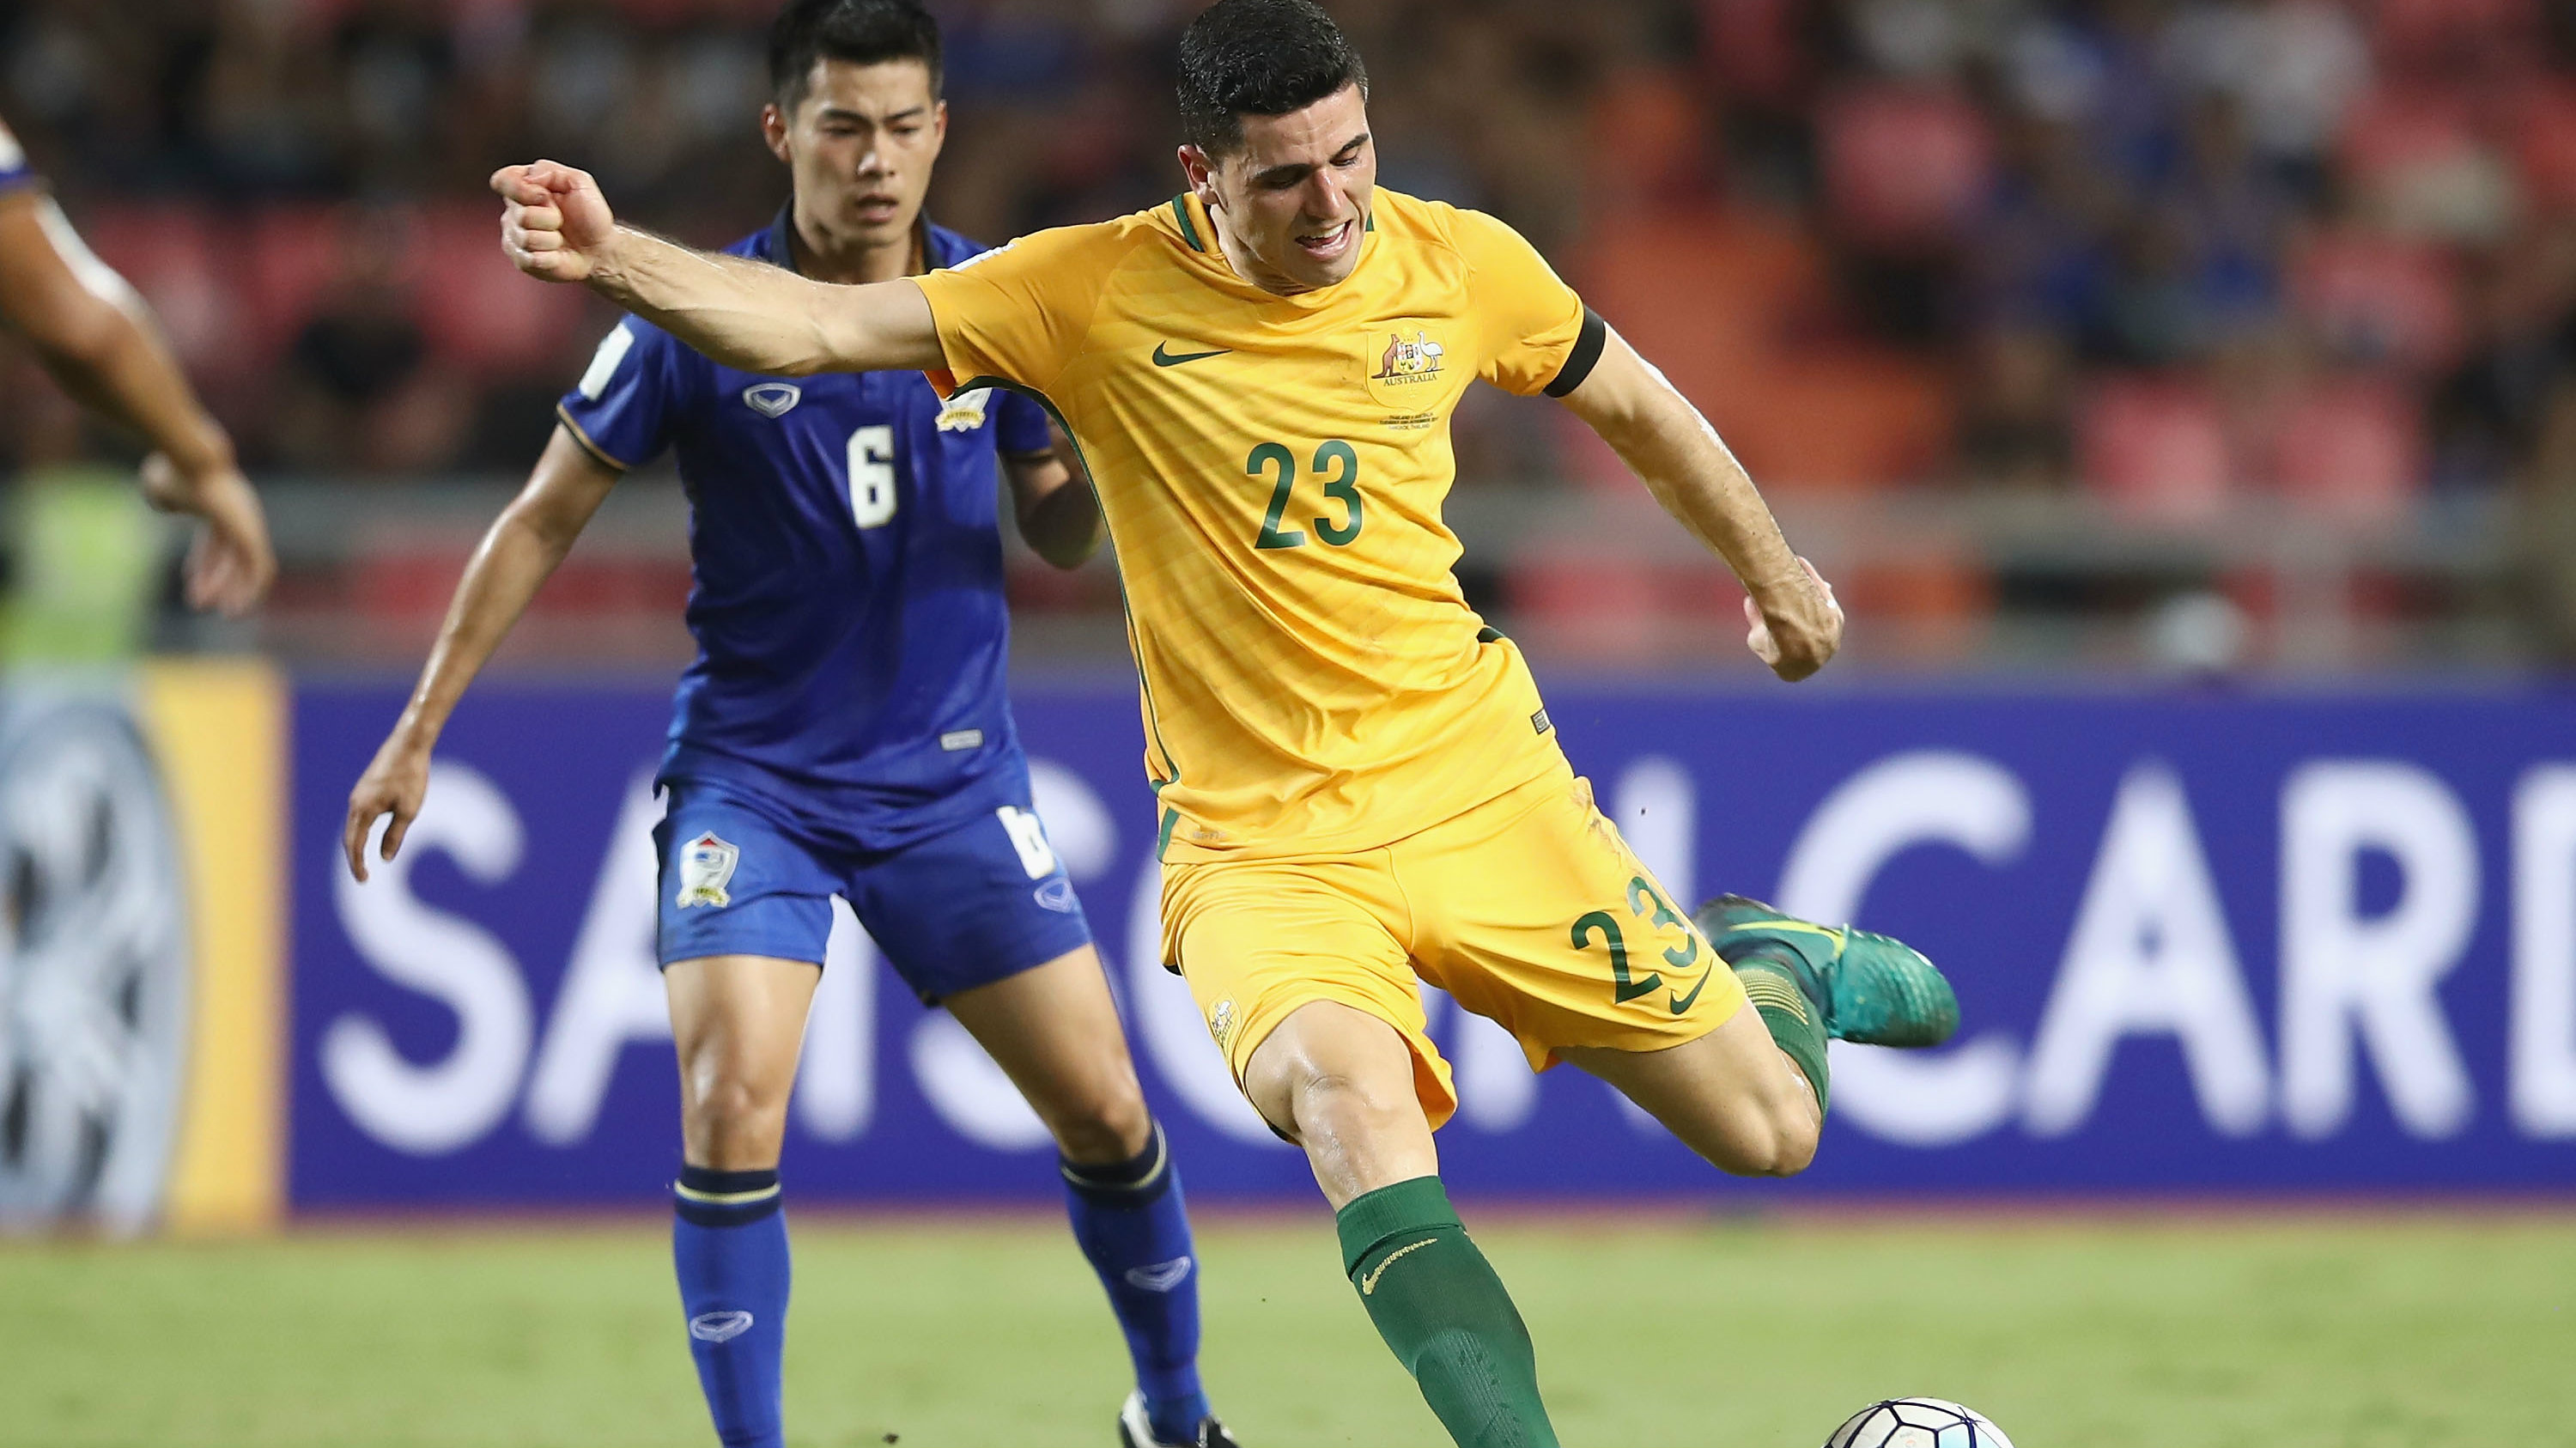 Caltex Socceroos star Tom Rogic on the ball during Australia's 2-2 draw with Thailand in November.